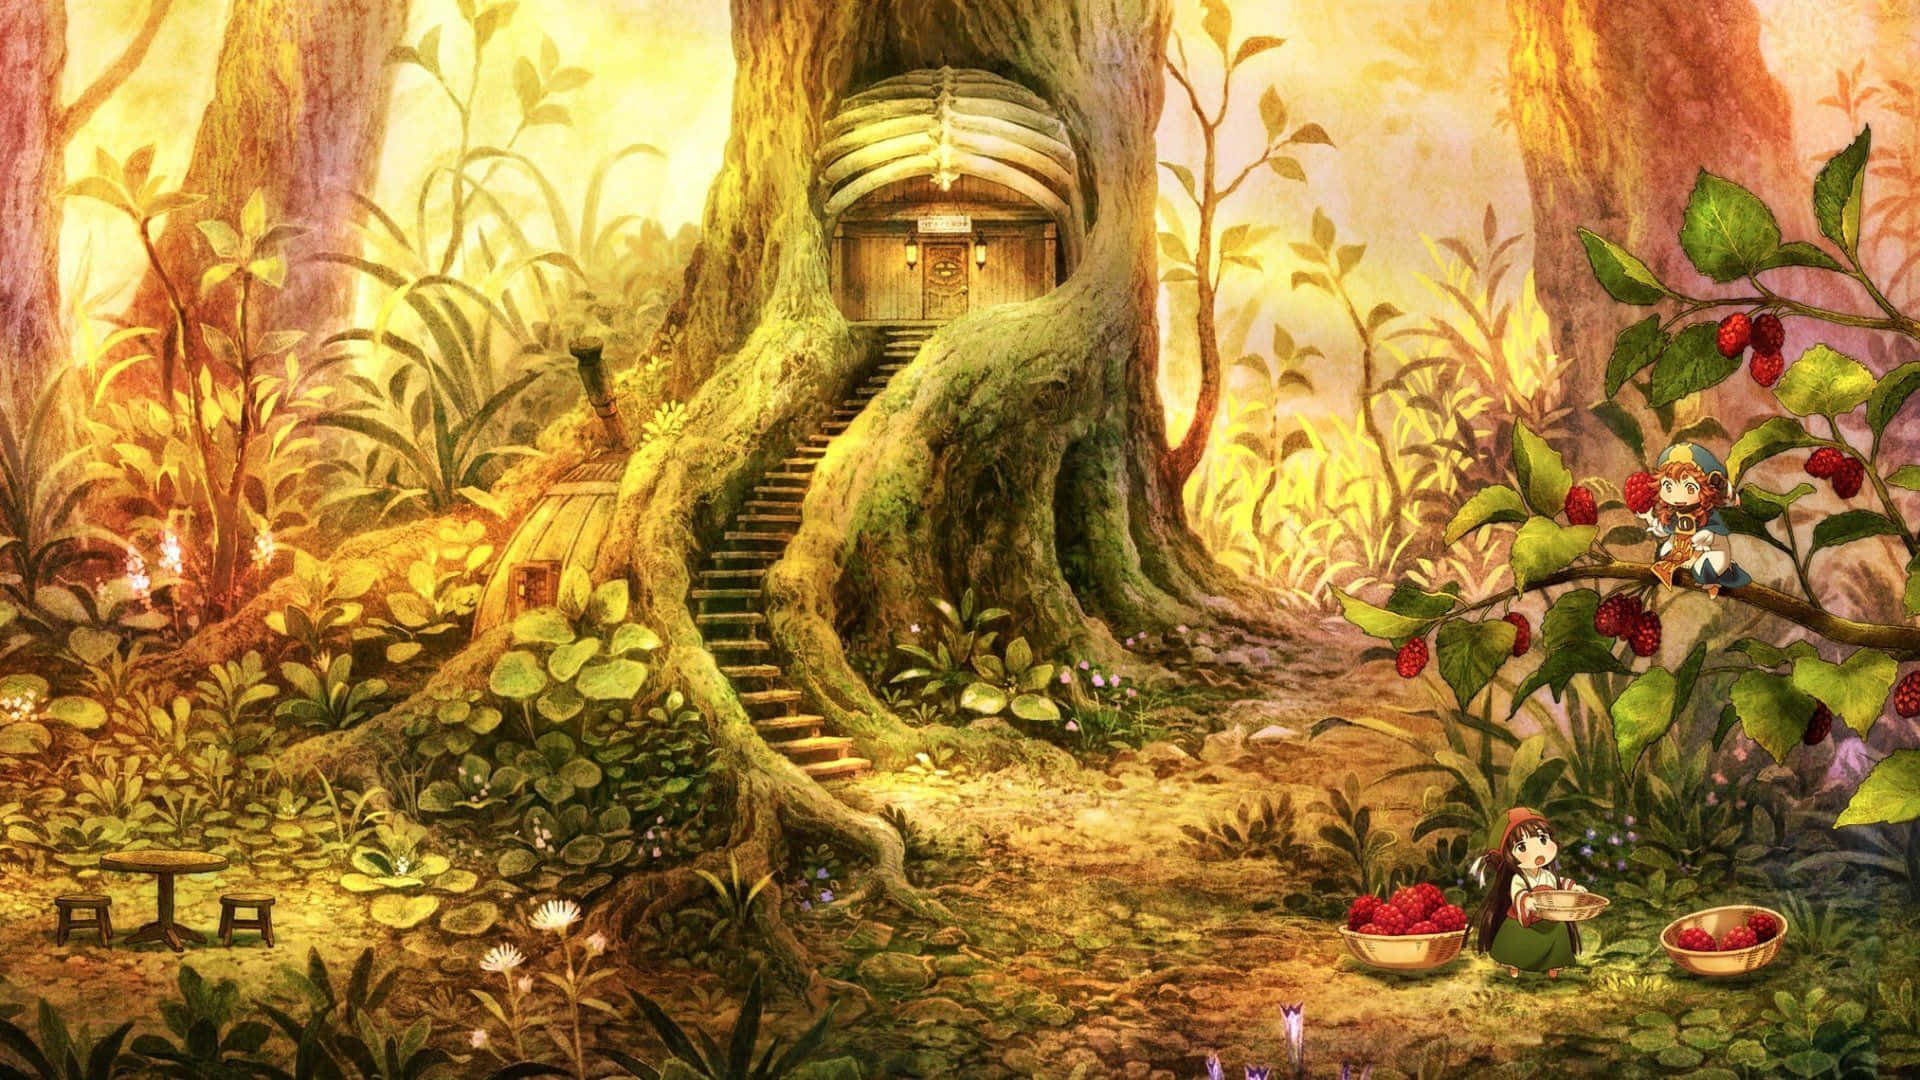 Enchanted Forest Cottage Aesthetic Wallpaper